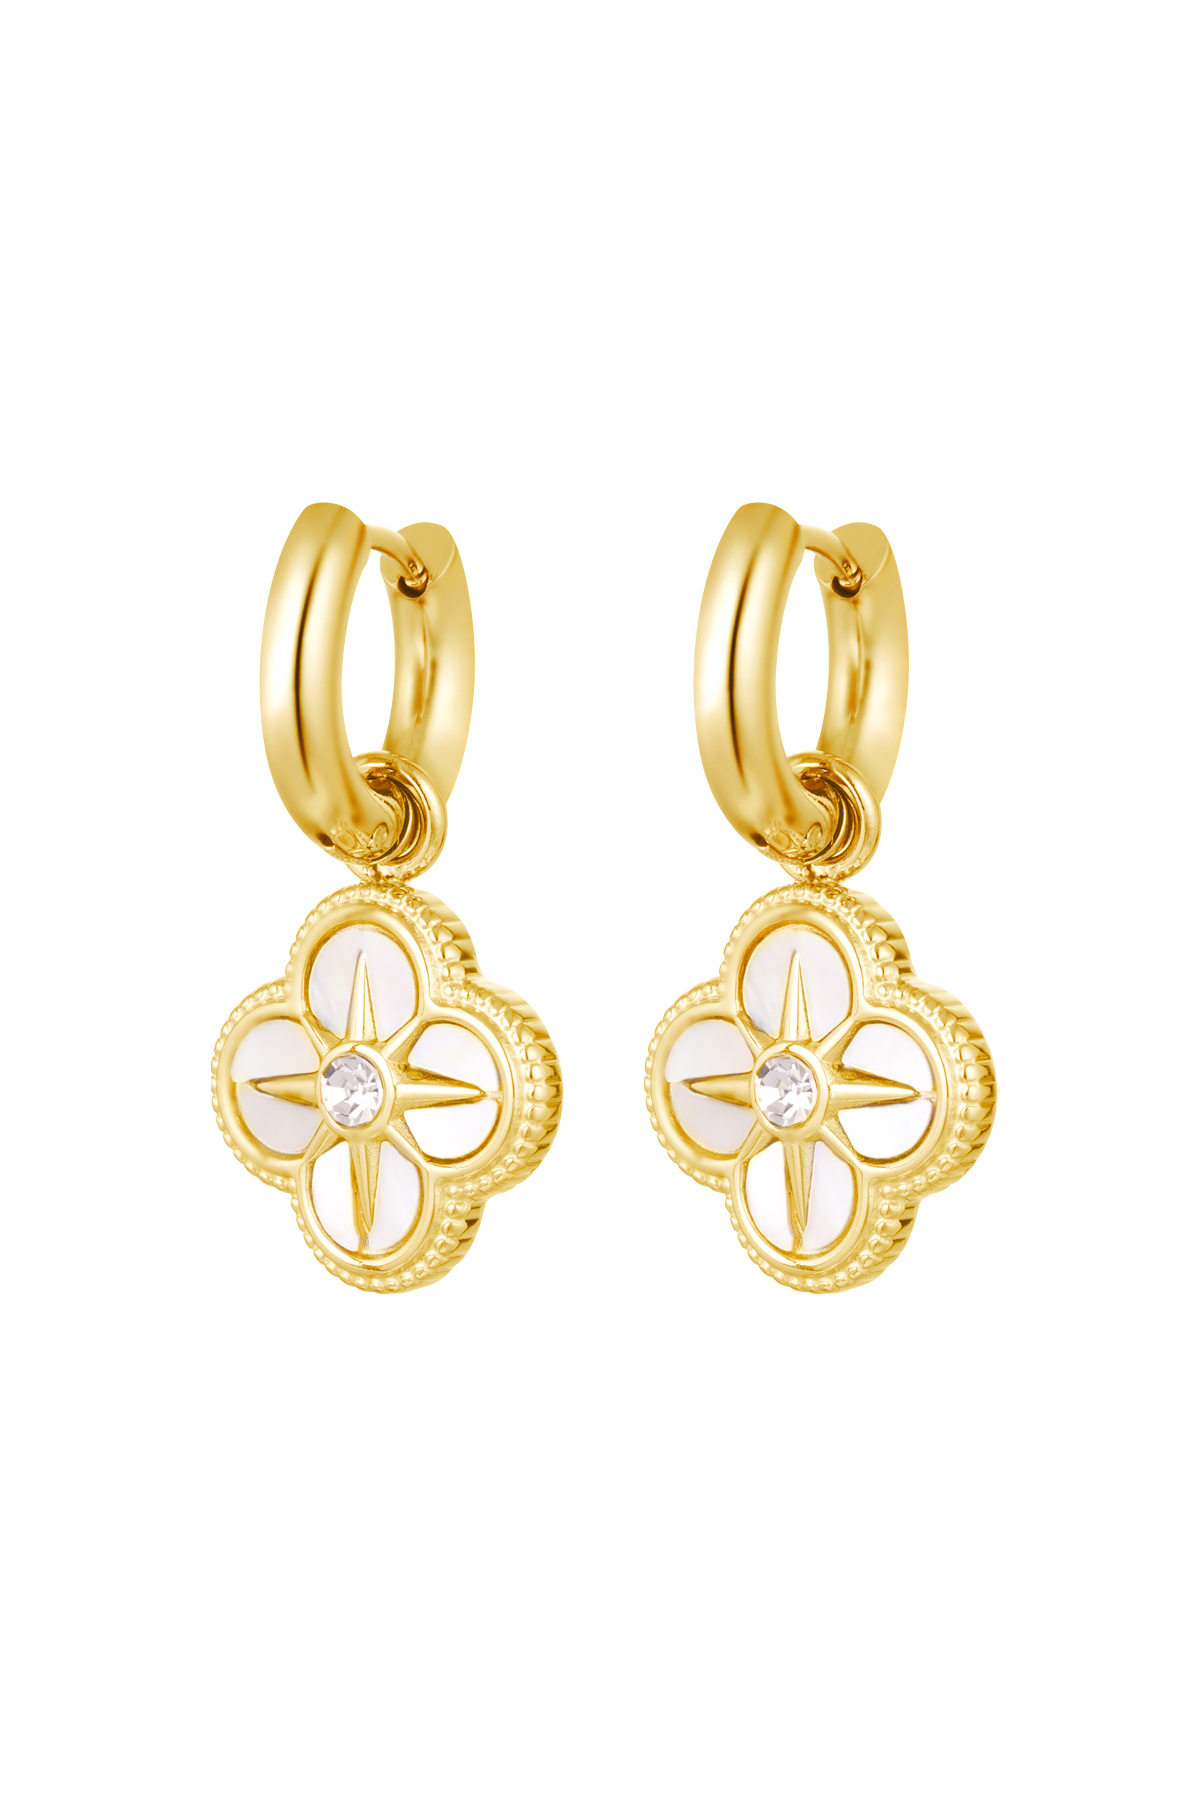 Earrings with flower/star charm - gold